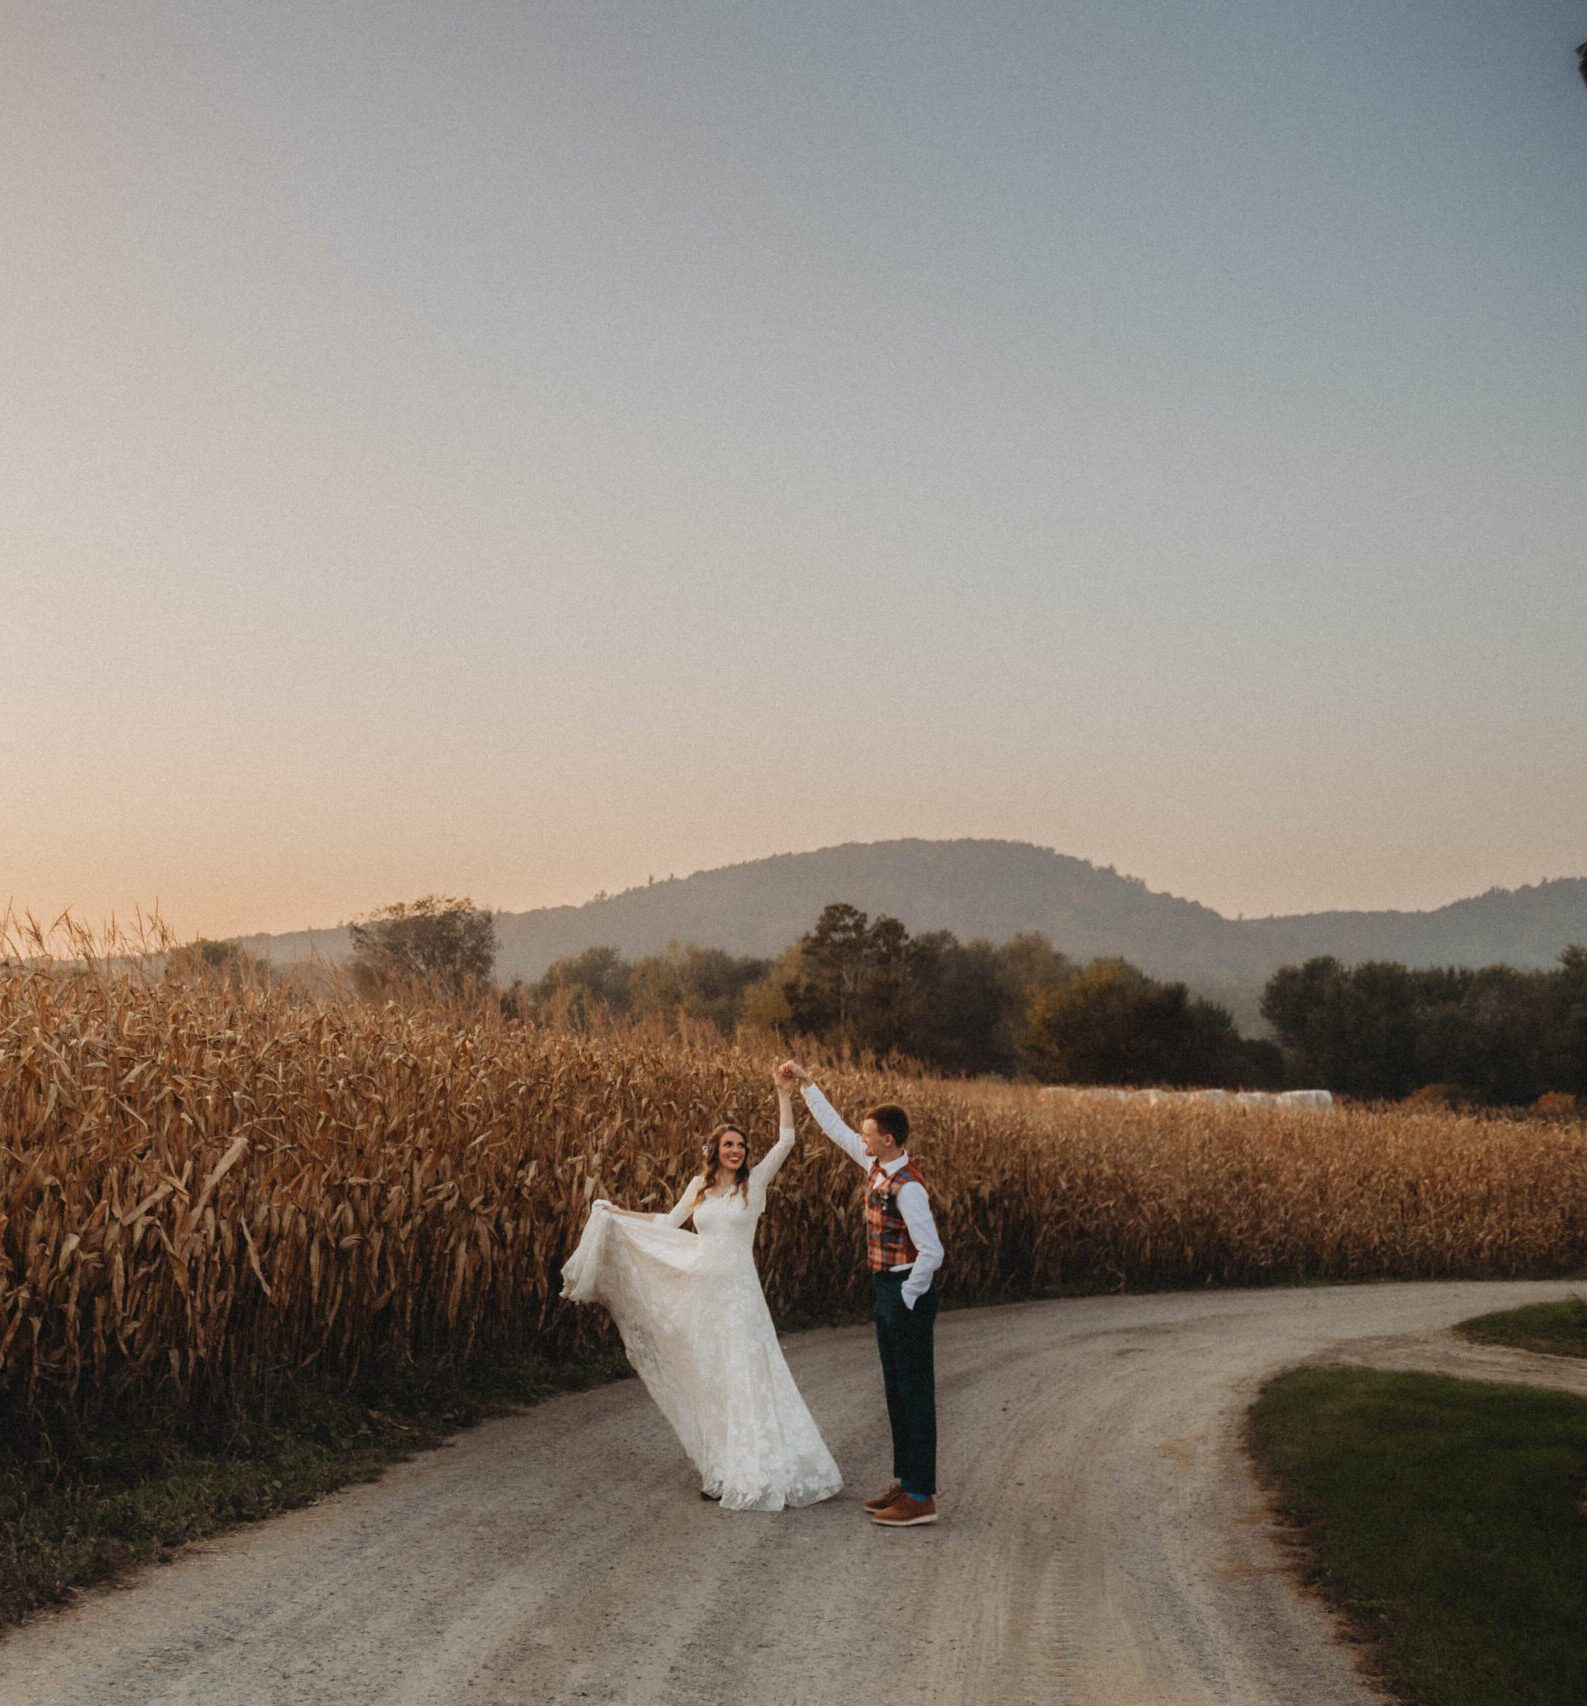 Emily and Sean dancing together in the middle of a dirt road at their Vermont farm wedding venue